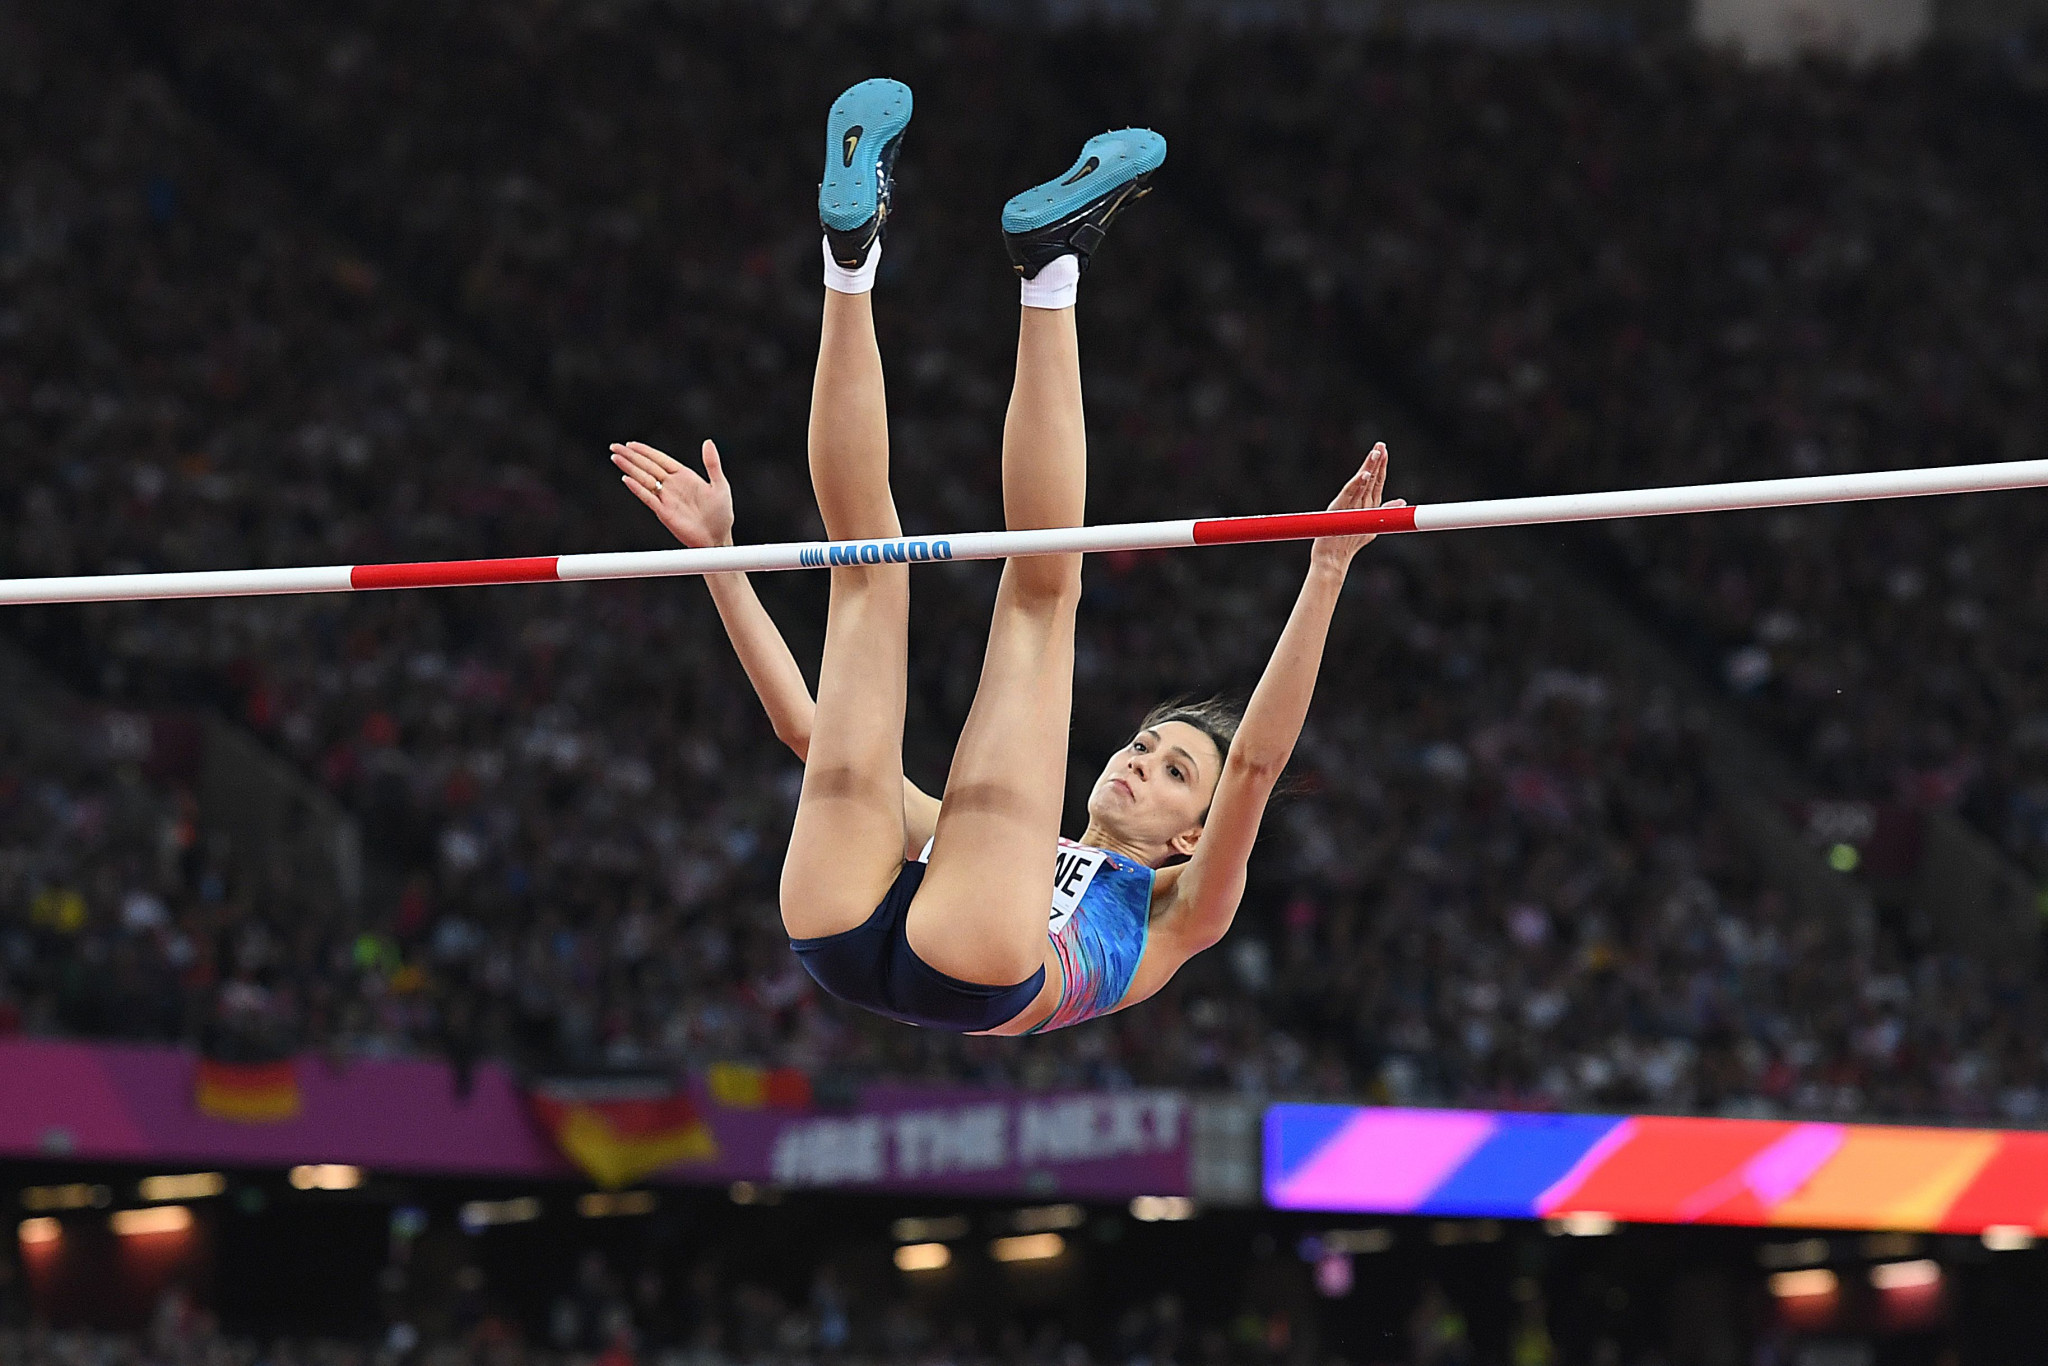 Maria Lasitskene is the two-time IAAF world high jump and the European Championship gold medallist but was denied the chance to challenge for Olympic gold at Rio 2016 because of the IAAF ban on Russia ©Getty Images